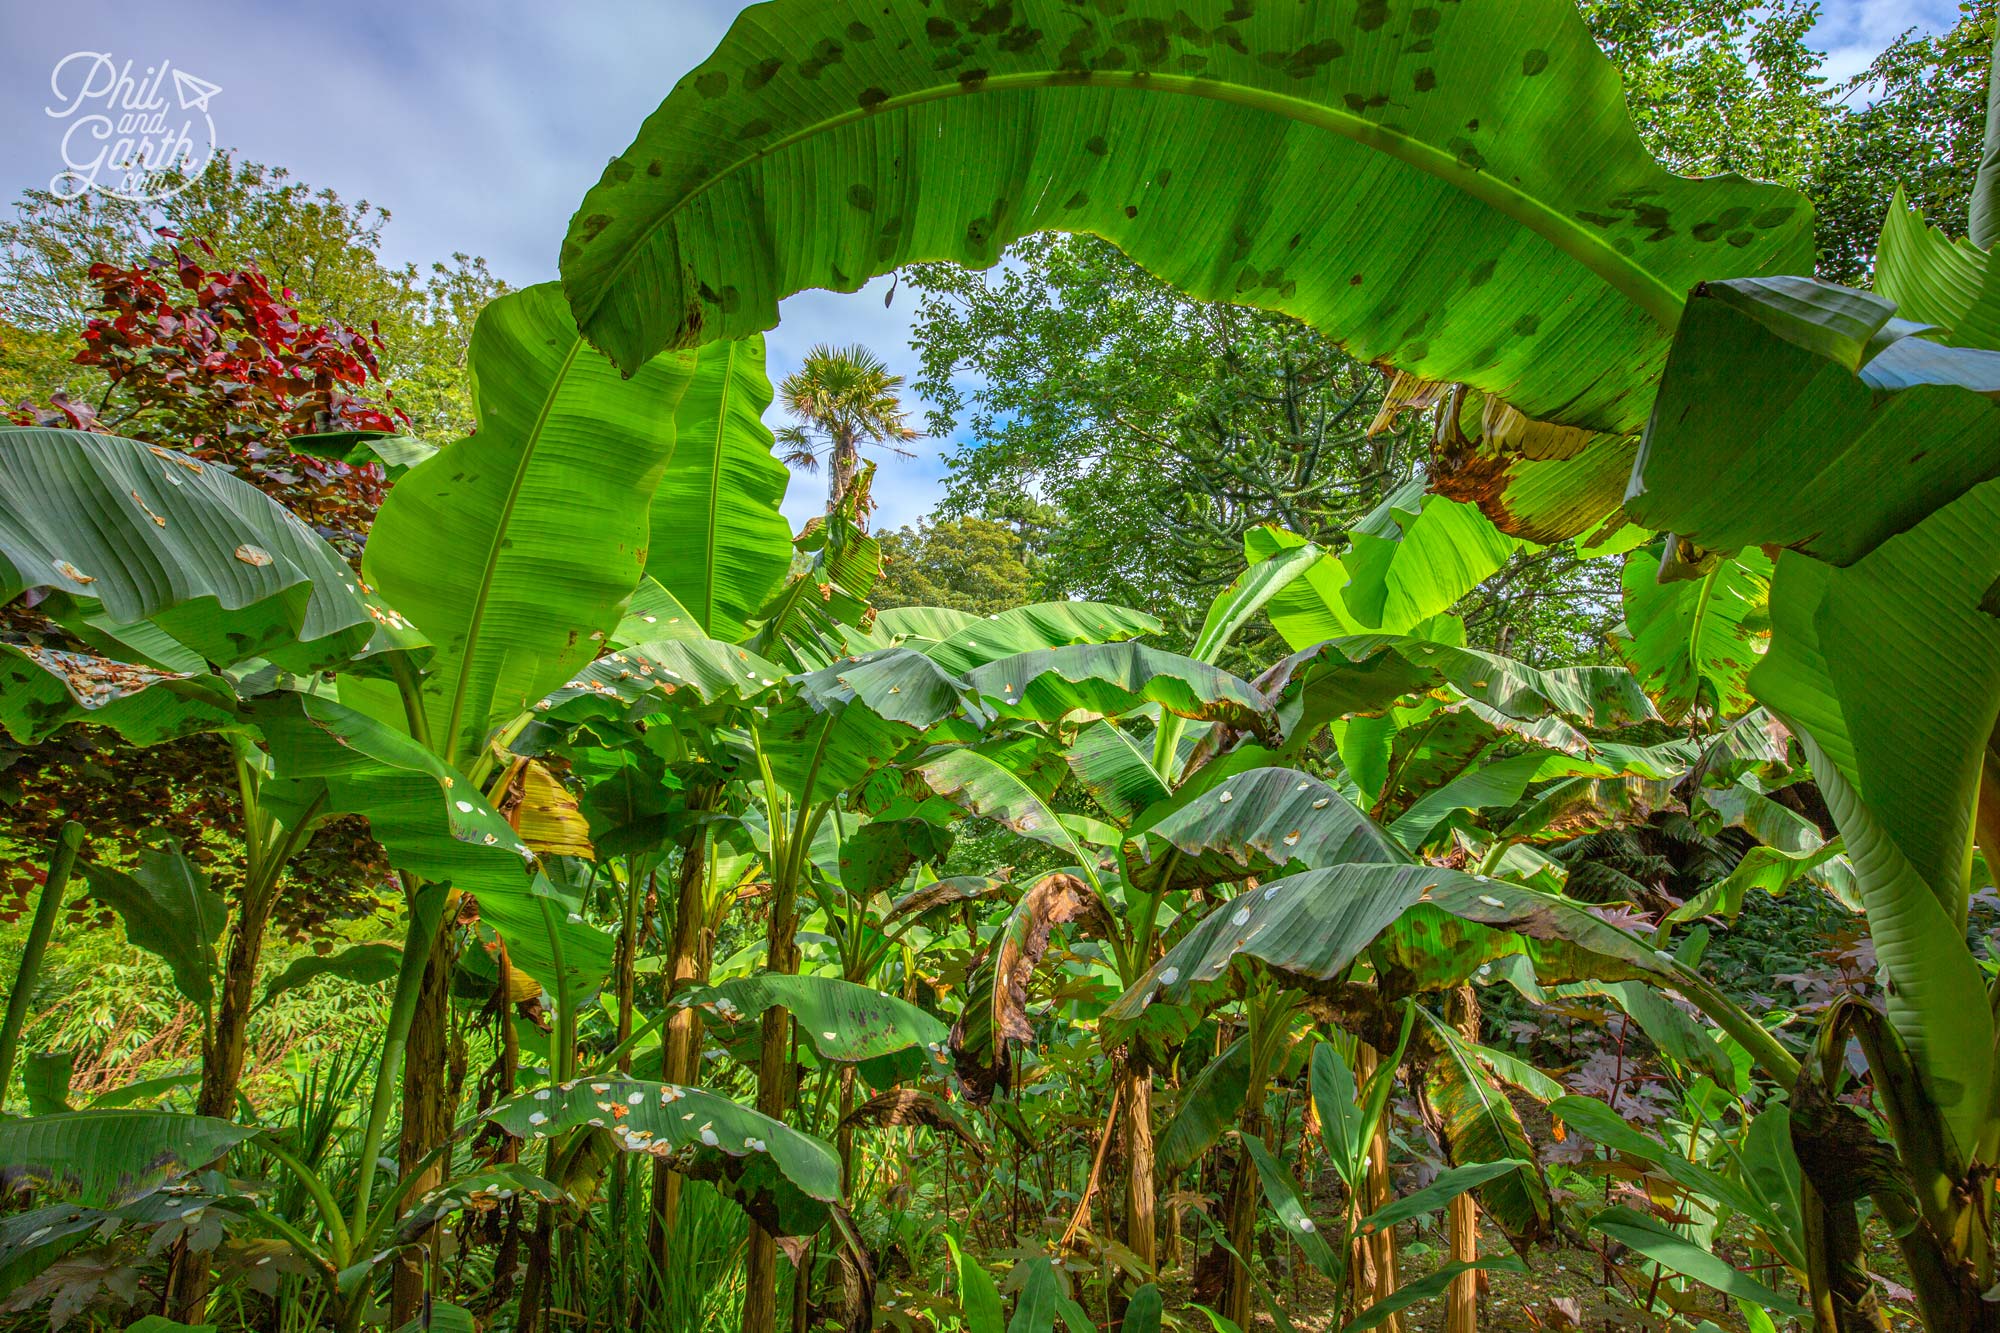 Banana plantation in the jungle valley - a part of the Heligan Gardens estate